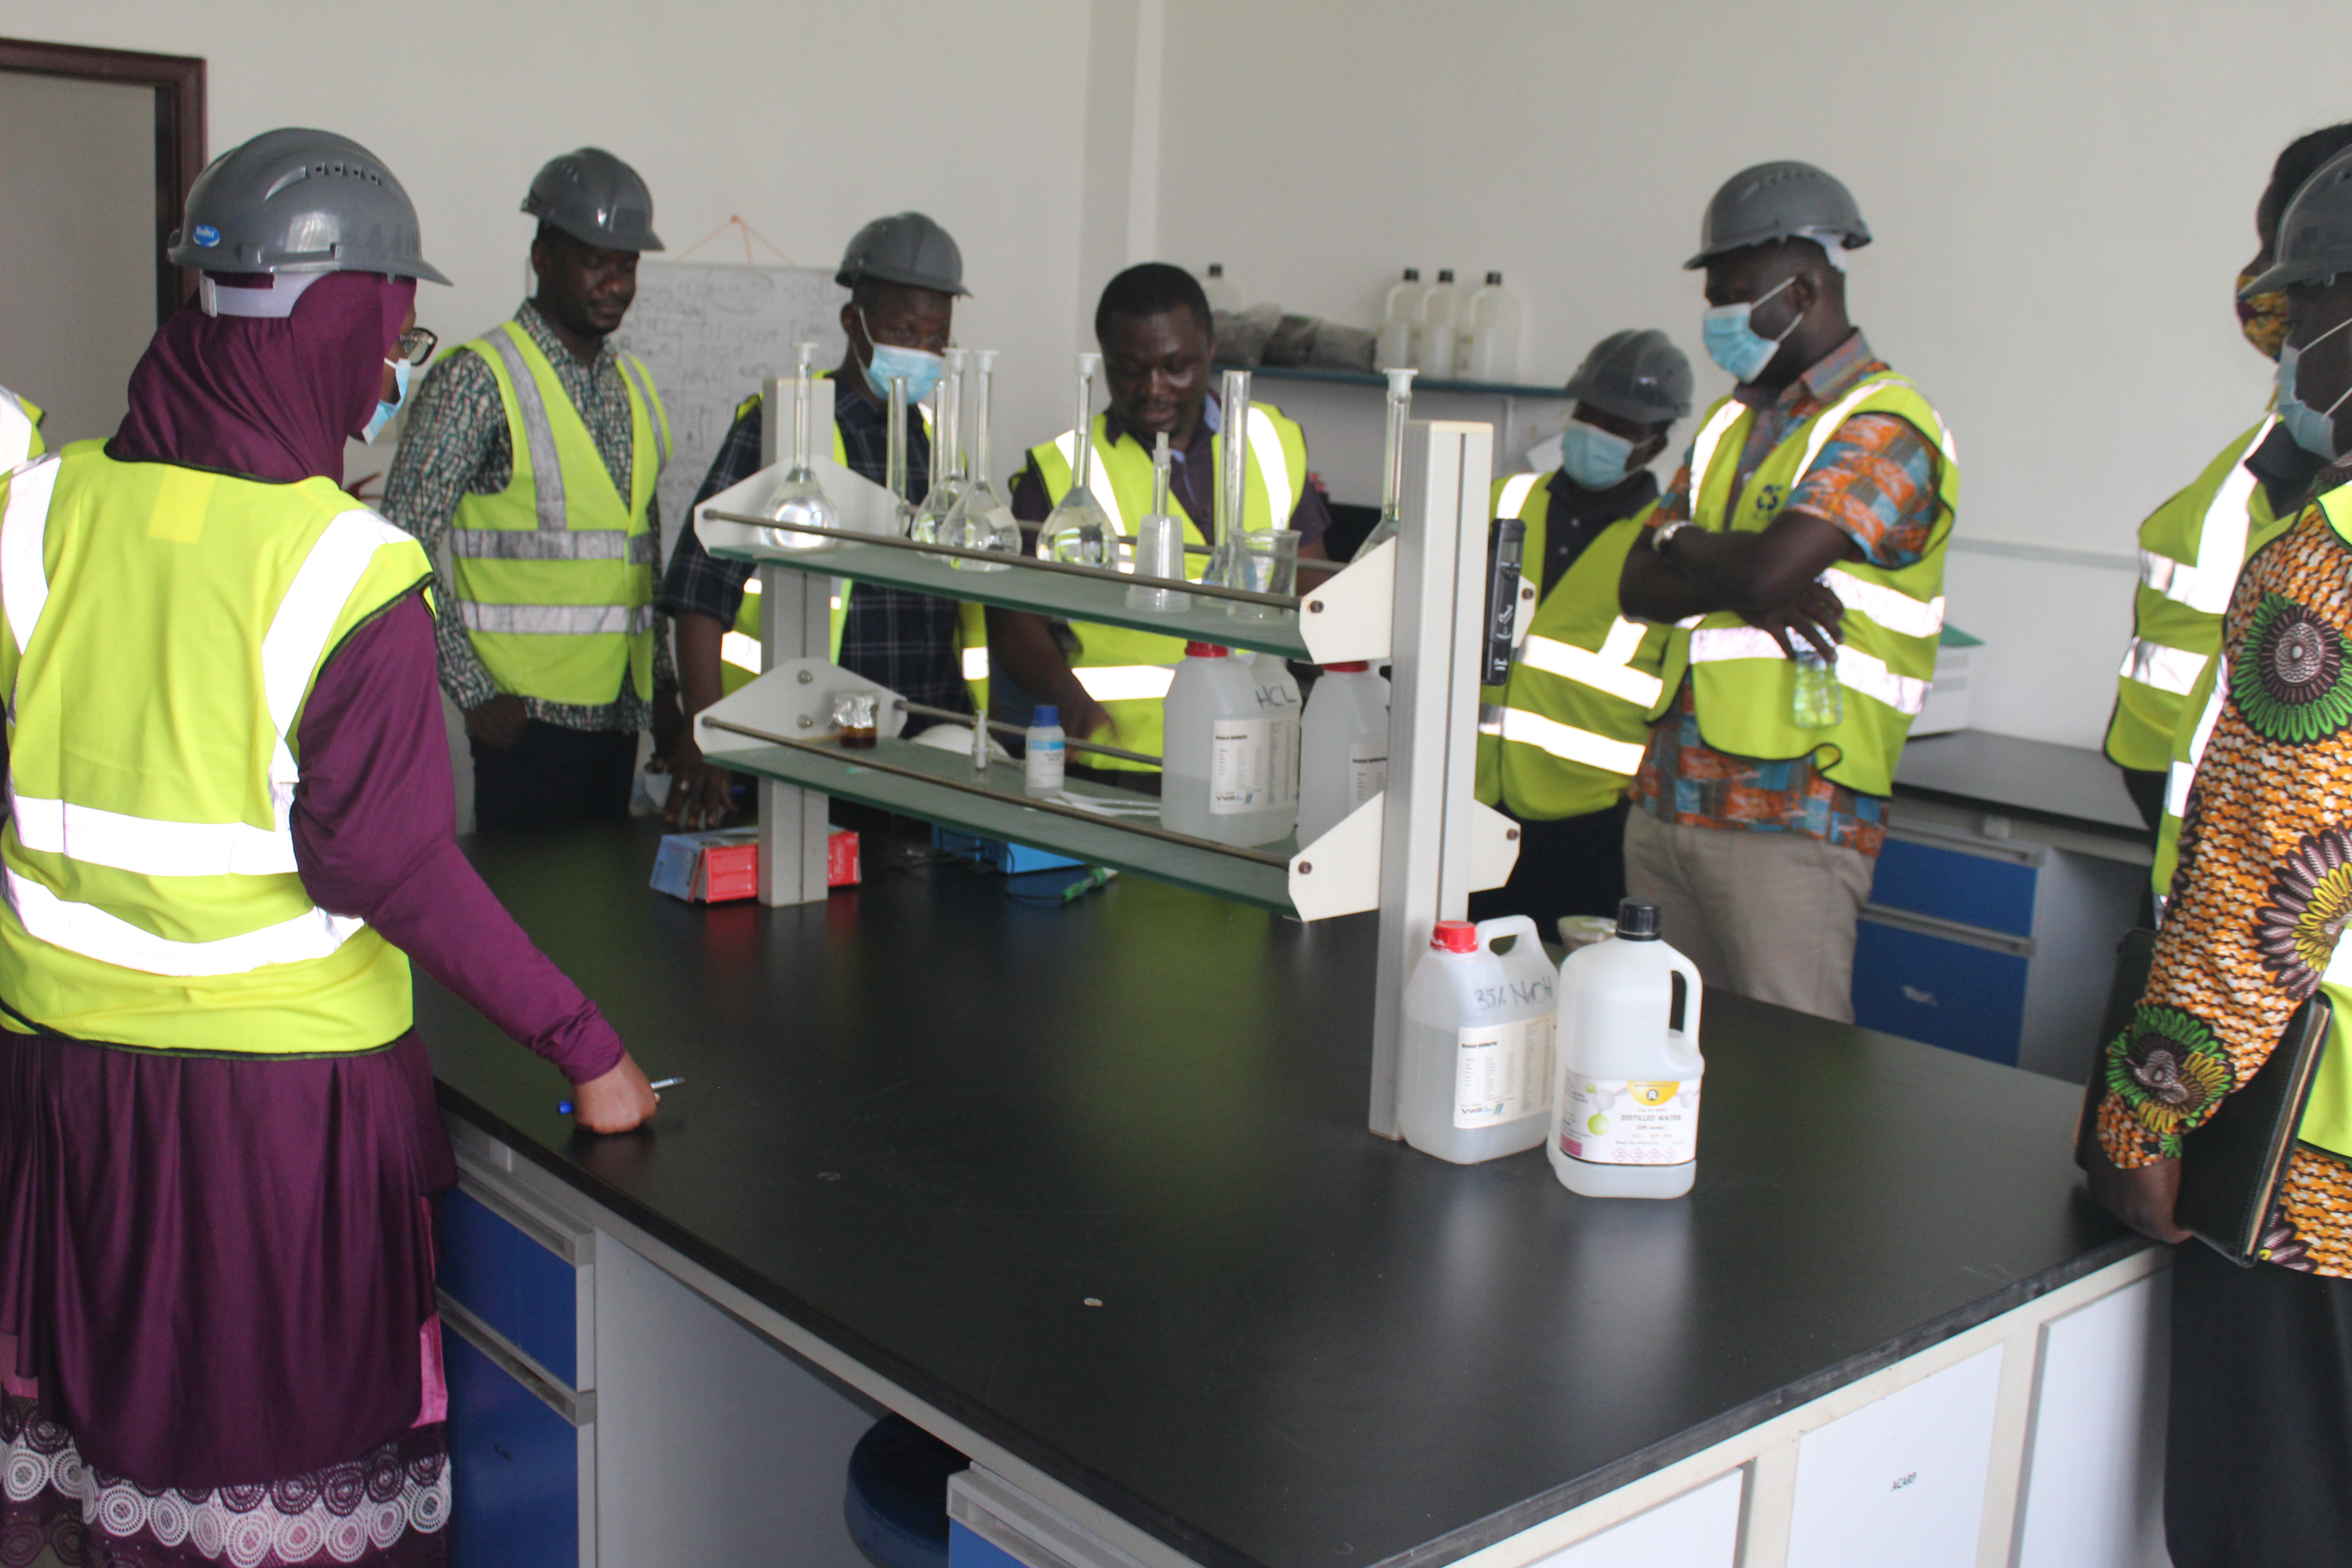 The Niger team in a discussion with officials of a laboratory at the Accra Compost and Recycling Plant during their learning tour to Ghana.